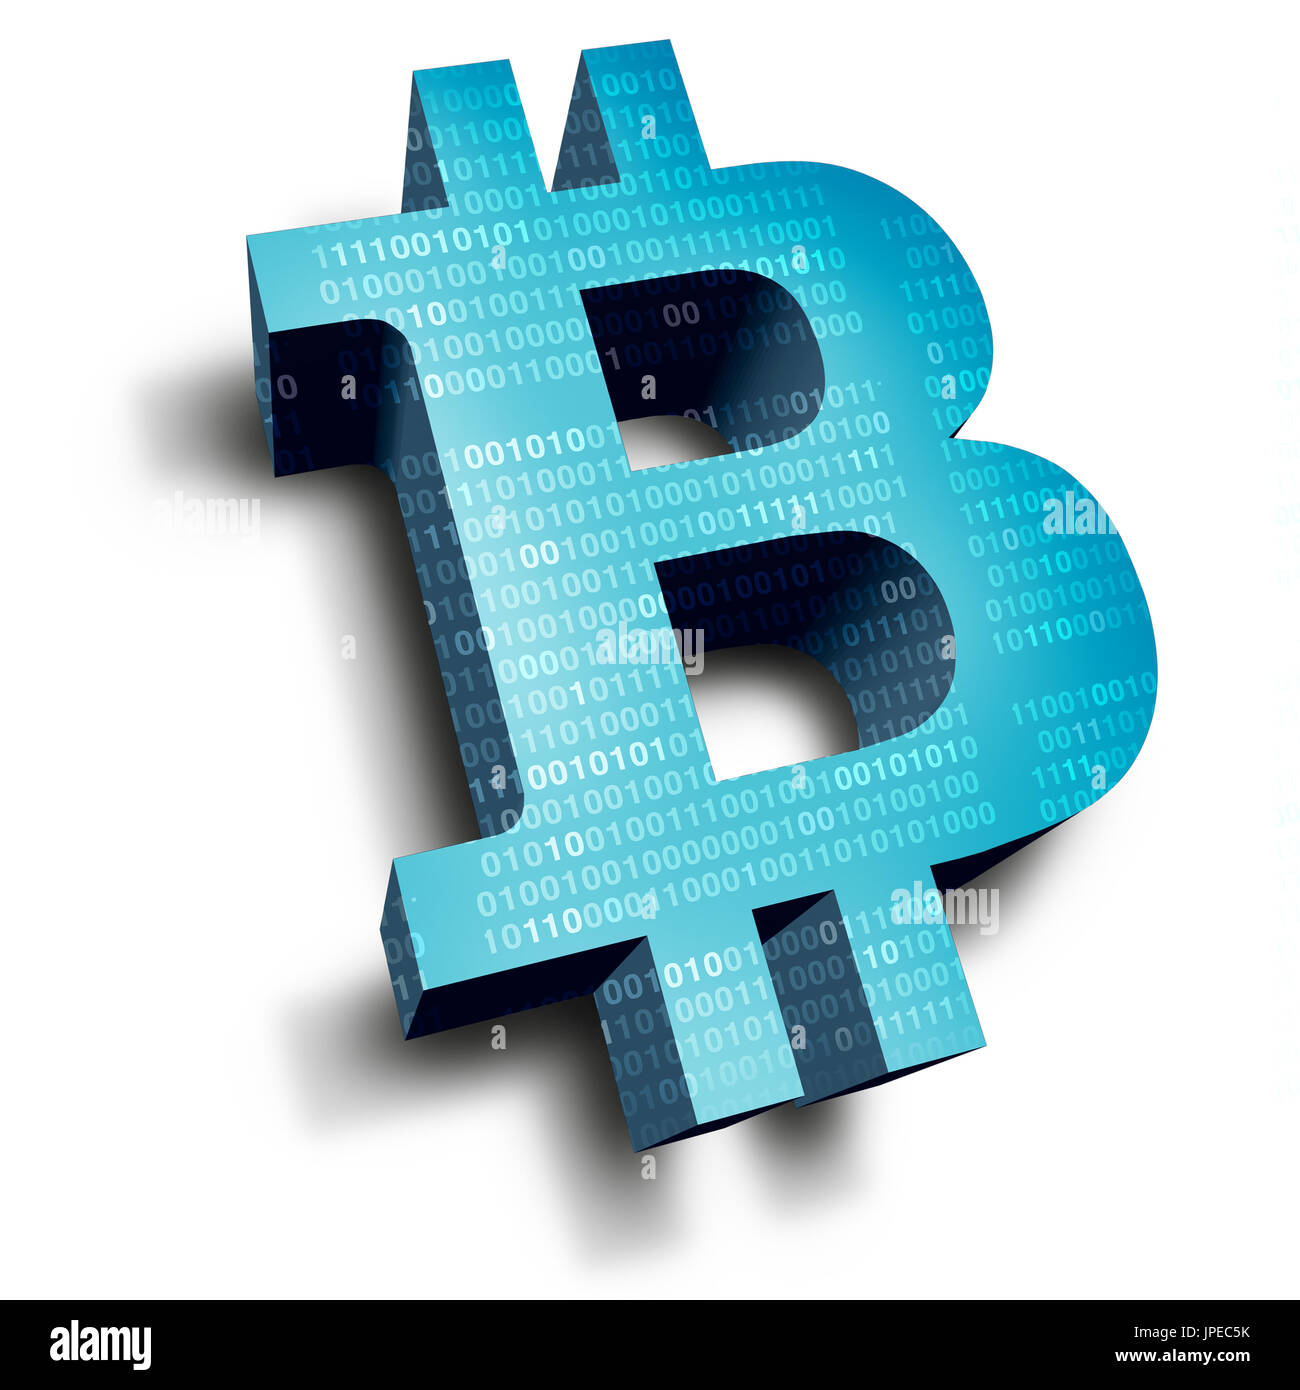 Bitcoin symbol cryptocurrency digital internet currency economic concept as online electronic money transaction from a banking database market. Stock Photo